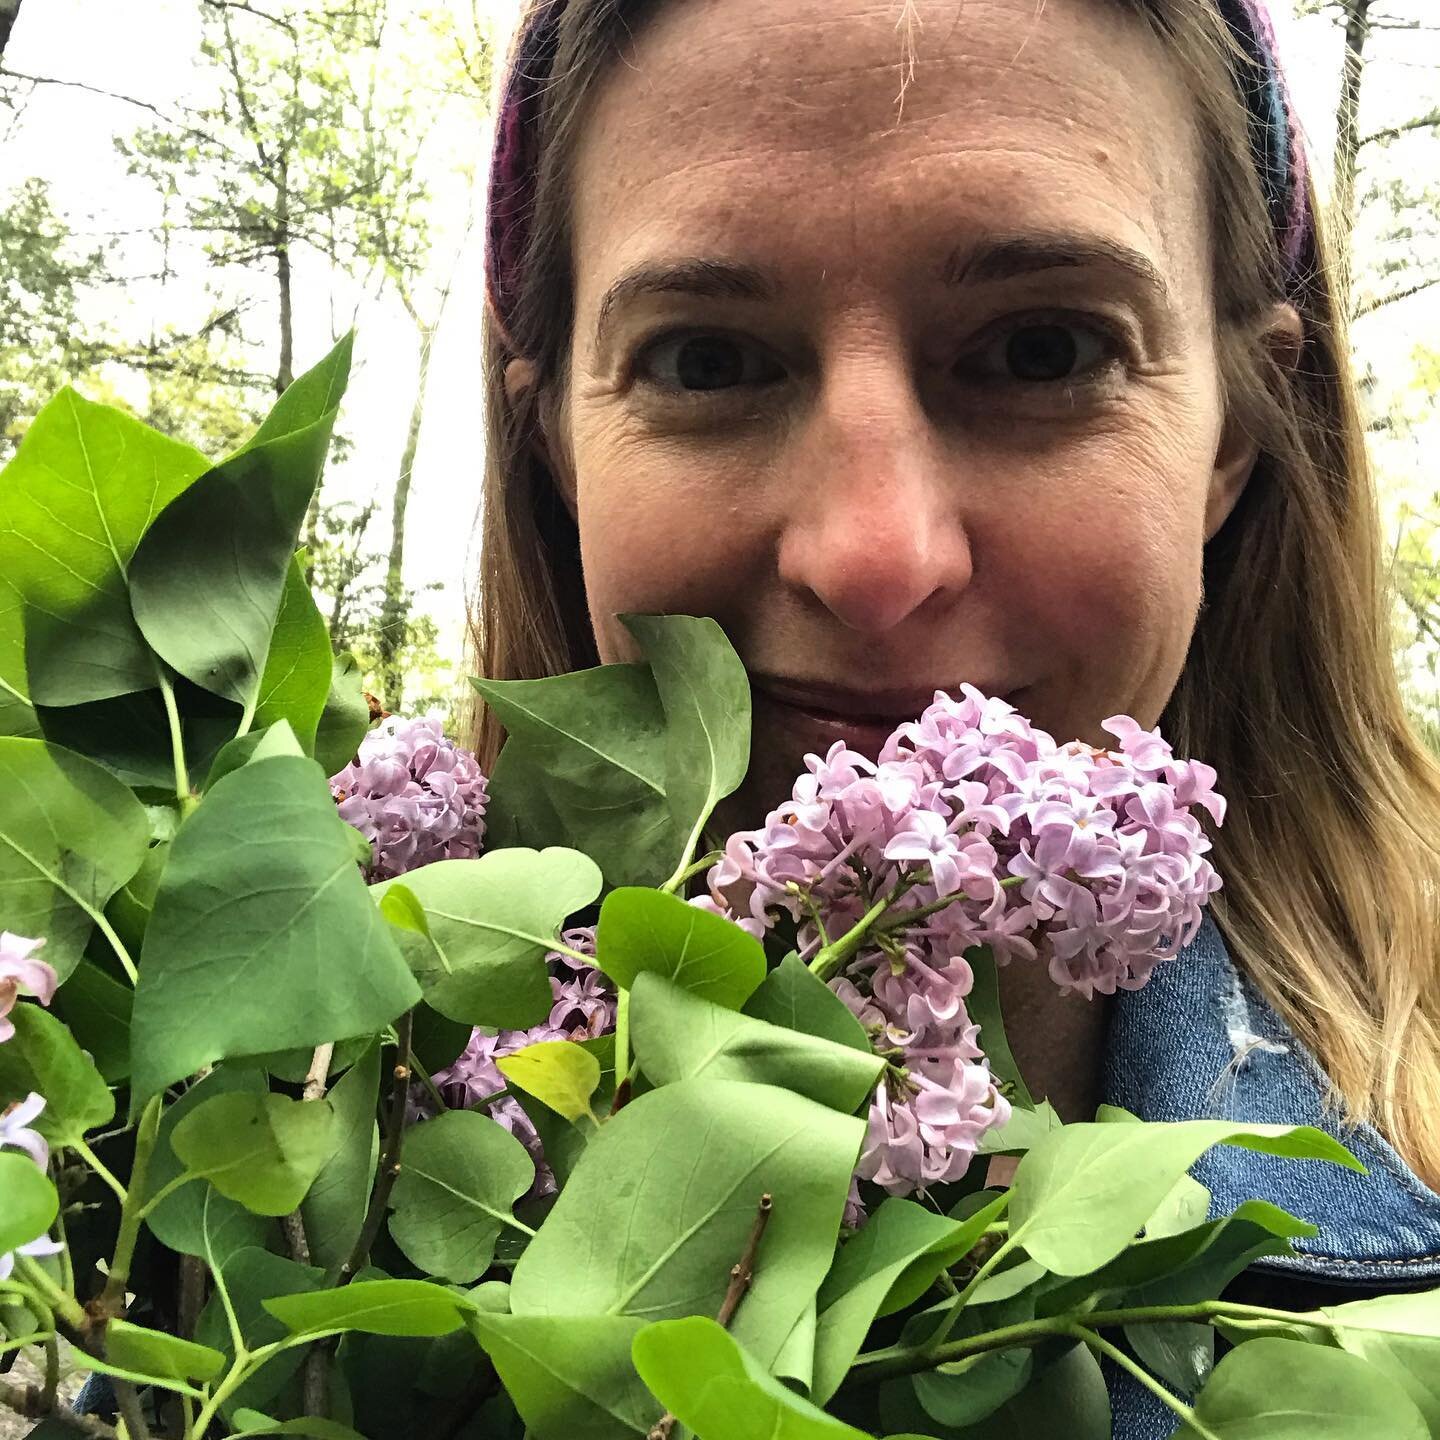 Been waiting for this moment for a solid (isolated) (and hard) year. 

Thank the Goddess that the lilacs always return.